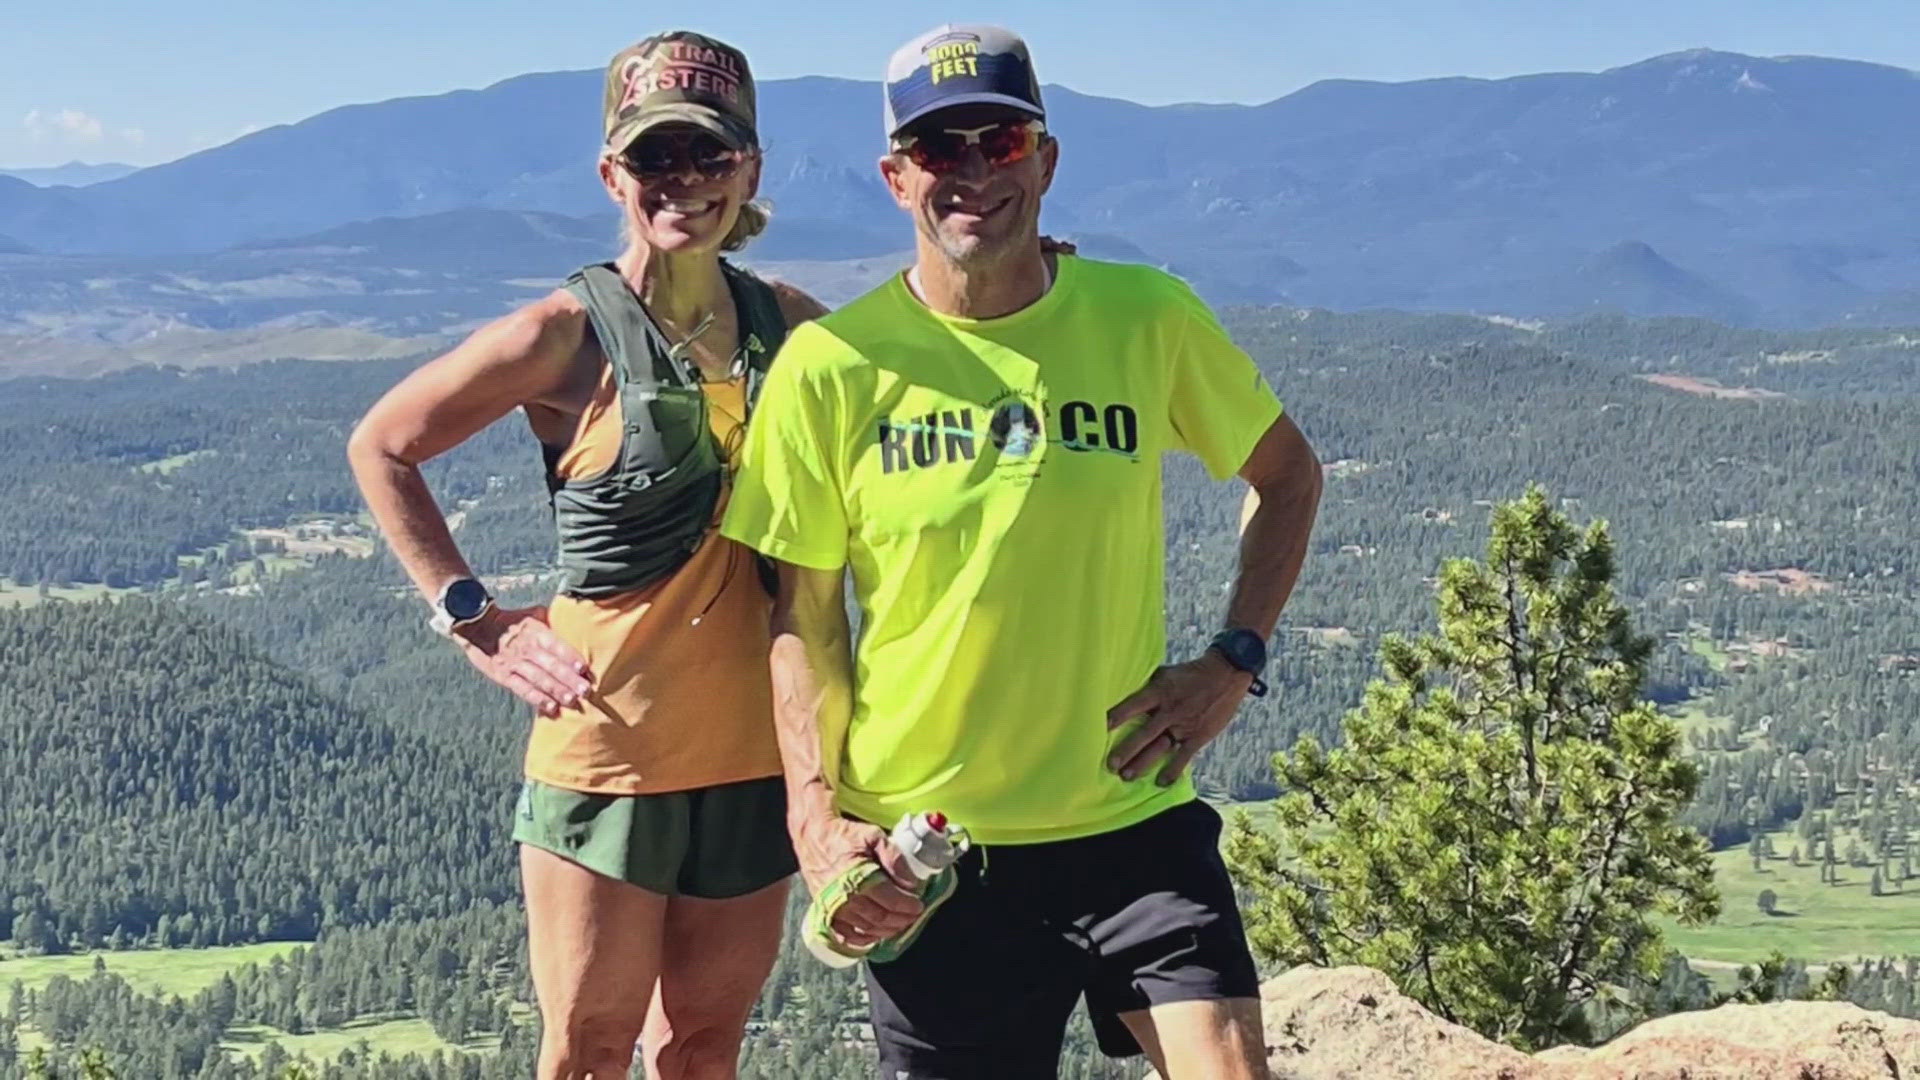 Grace Sims is a CU grad who made a promise to herself to run marathons every year and after donating a kidney she's back training.